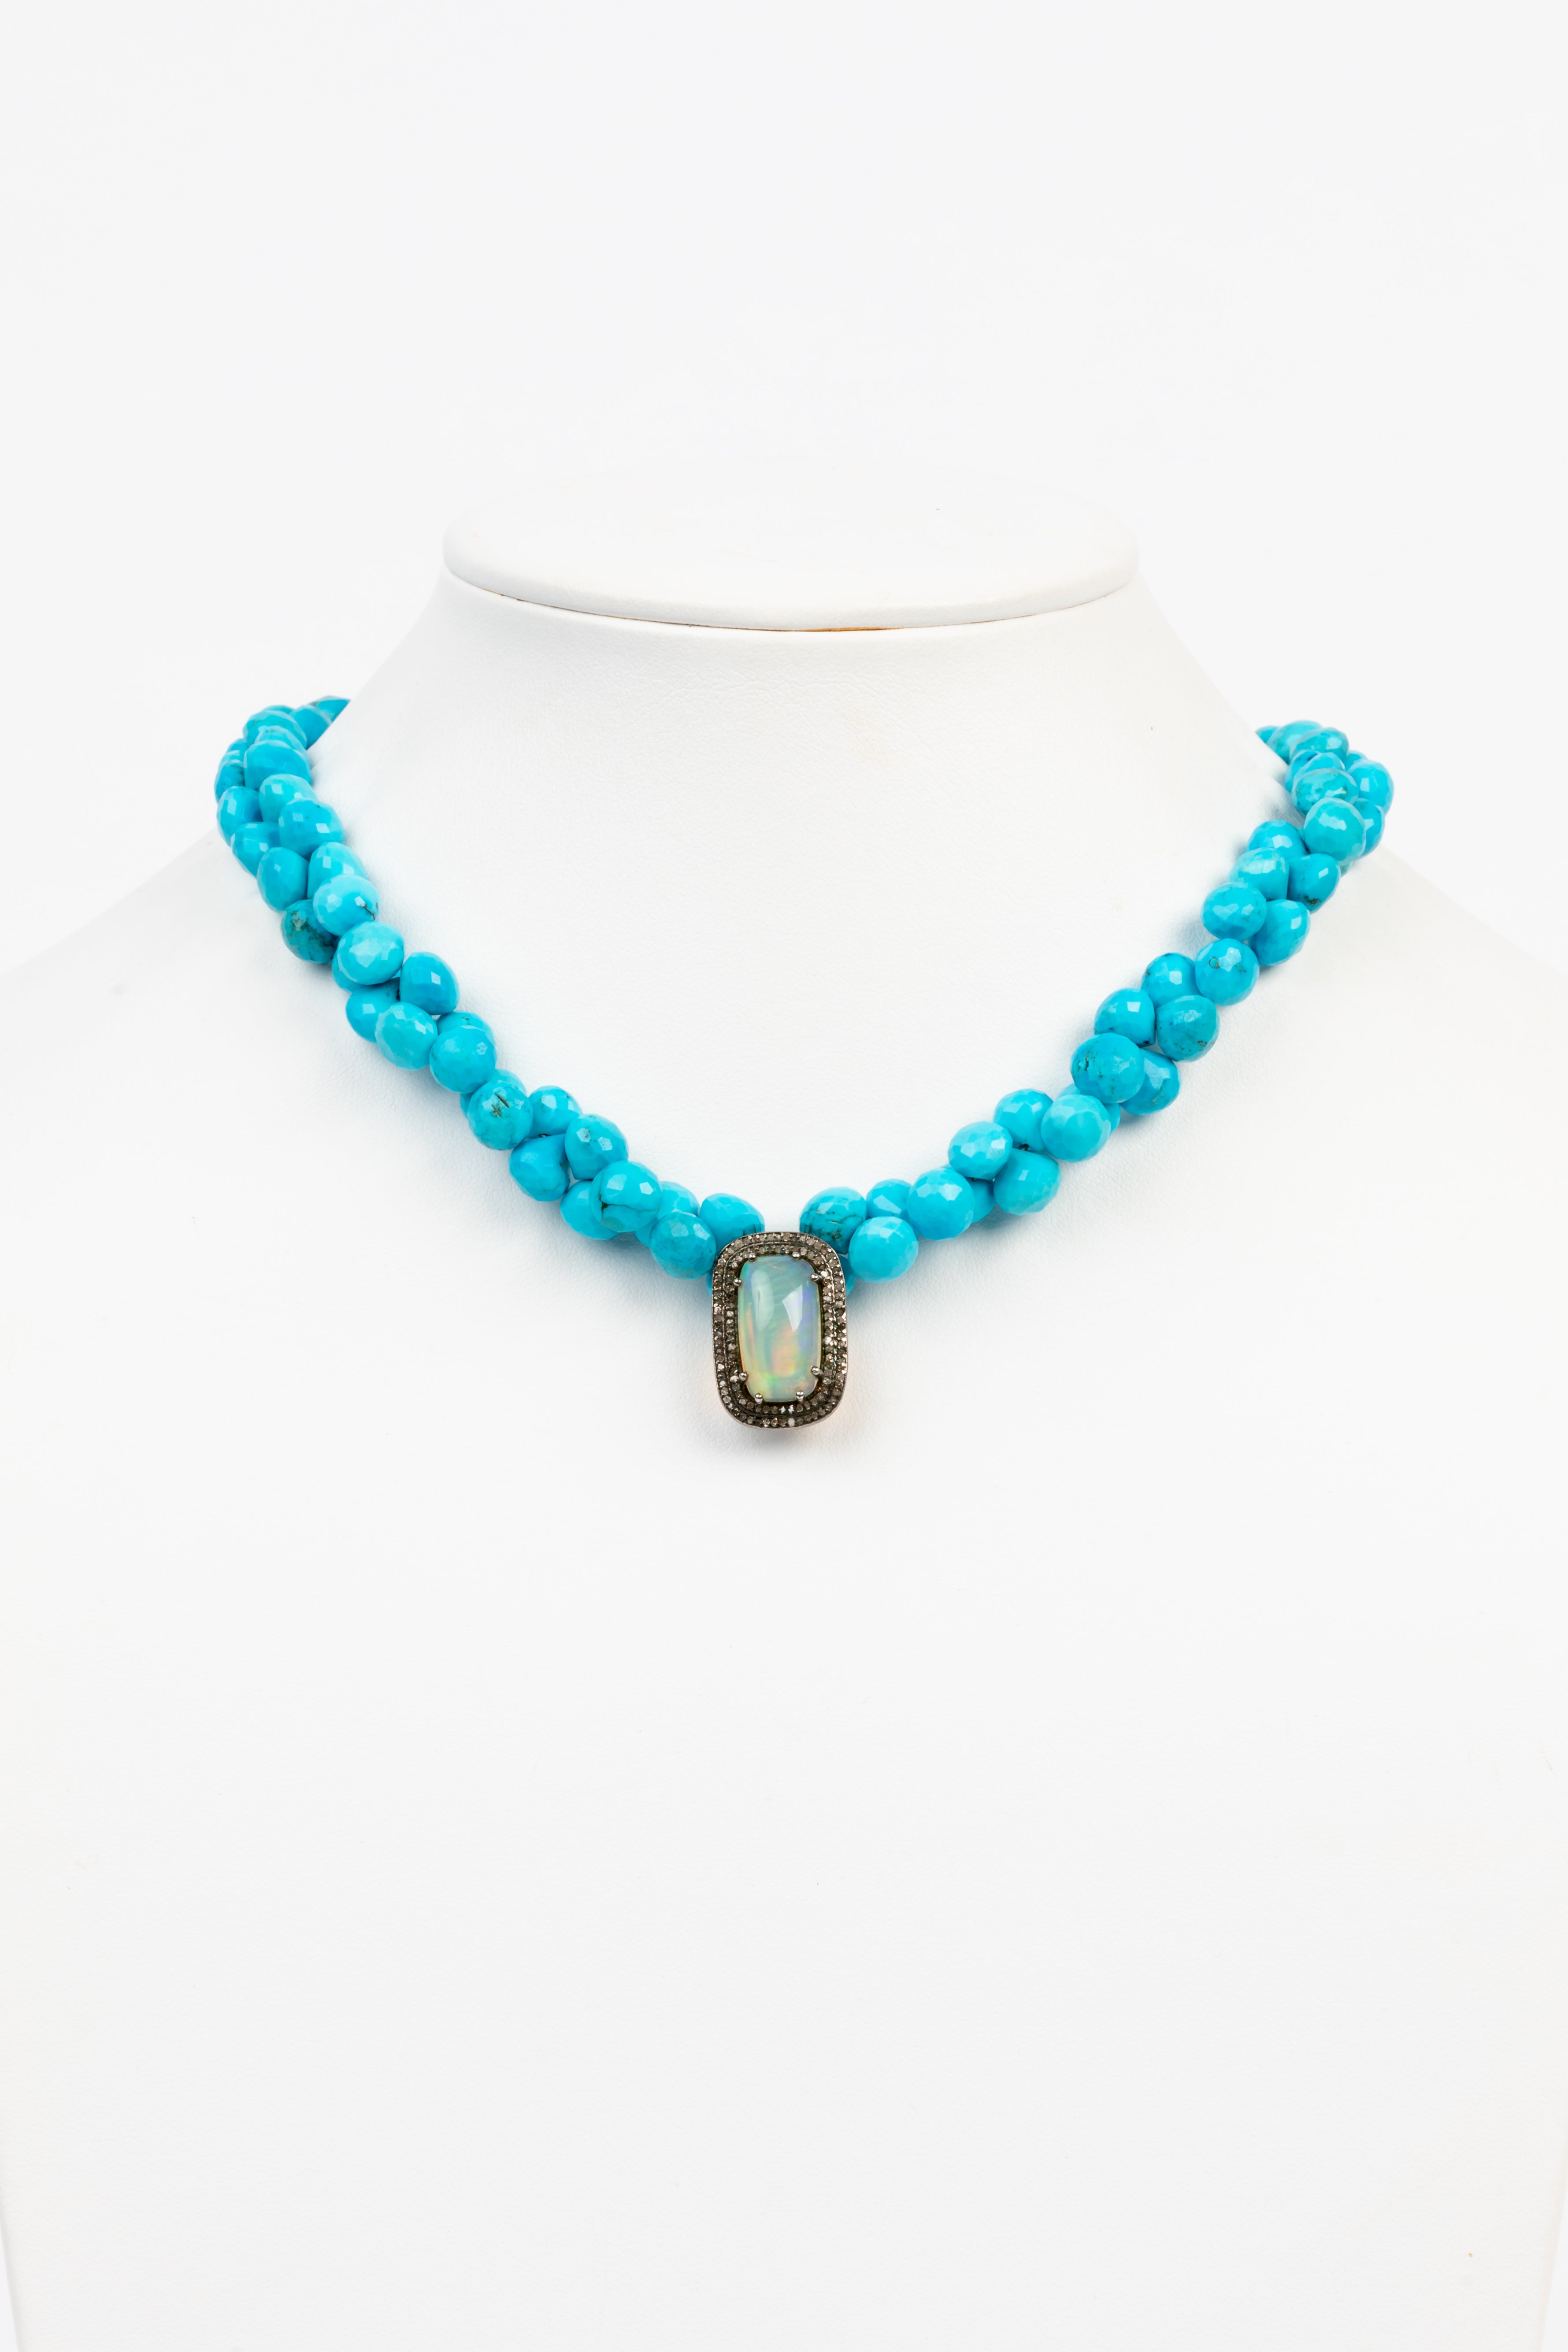 Pave Diamond, Opal, Turquoise Necklace